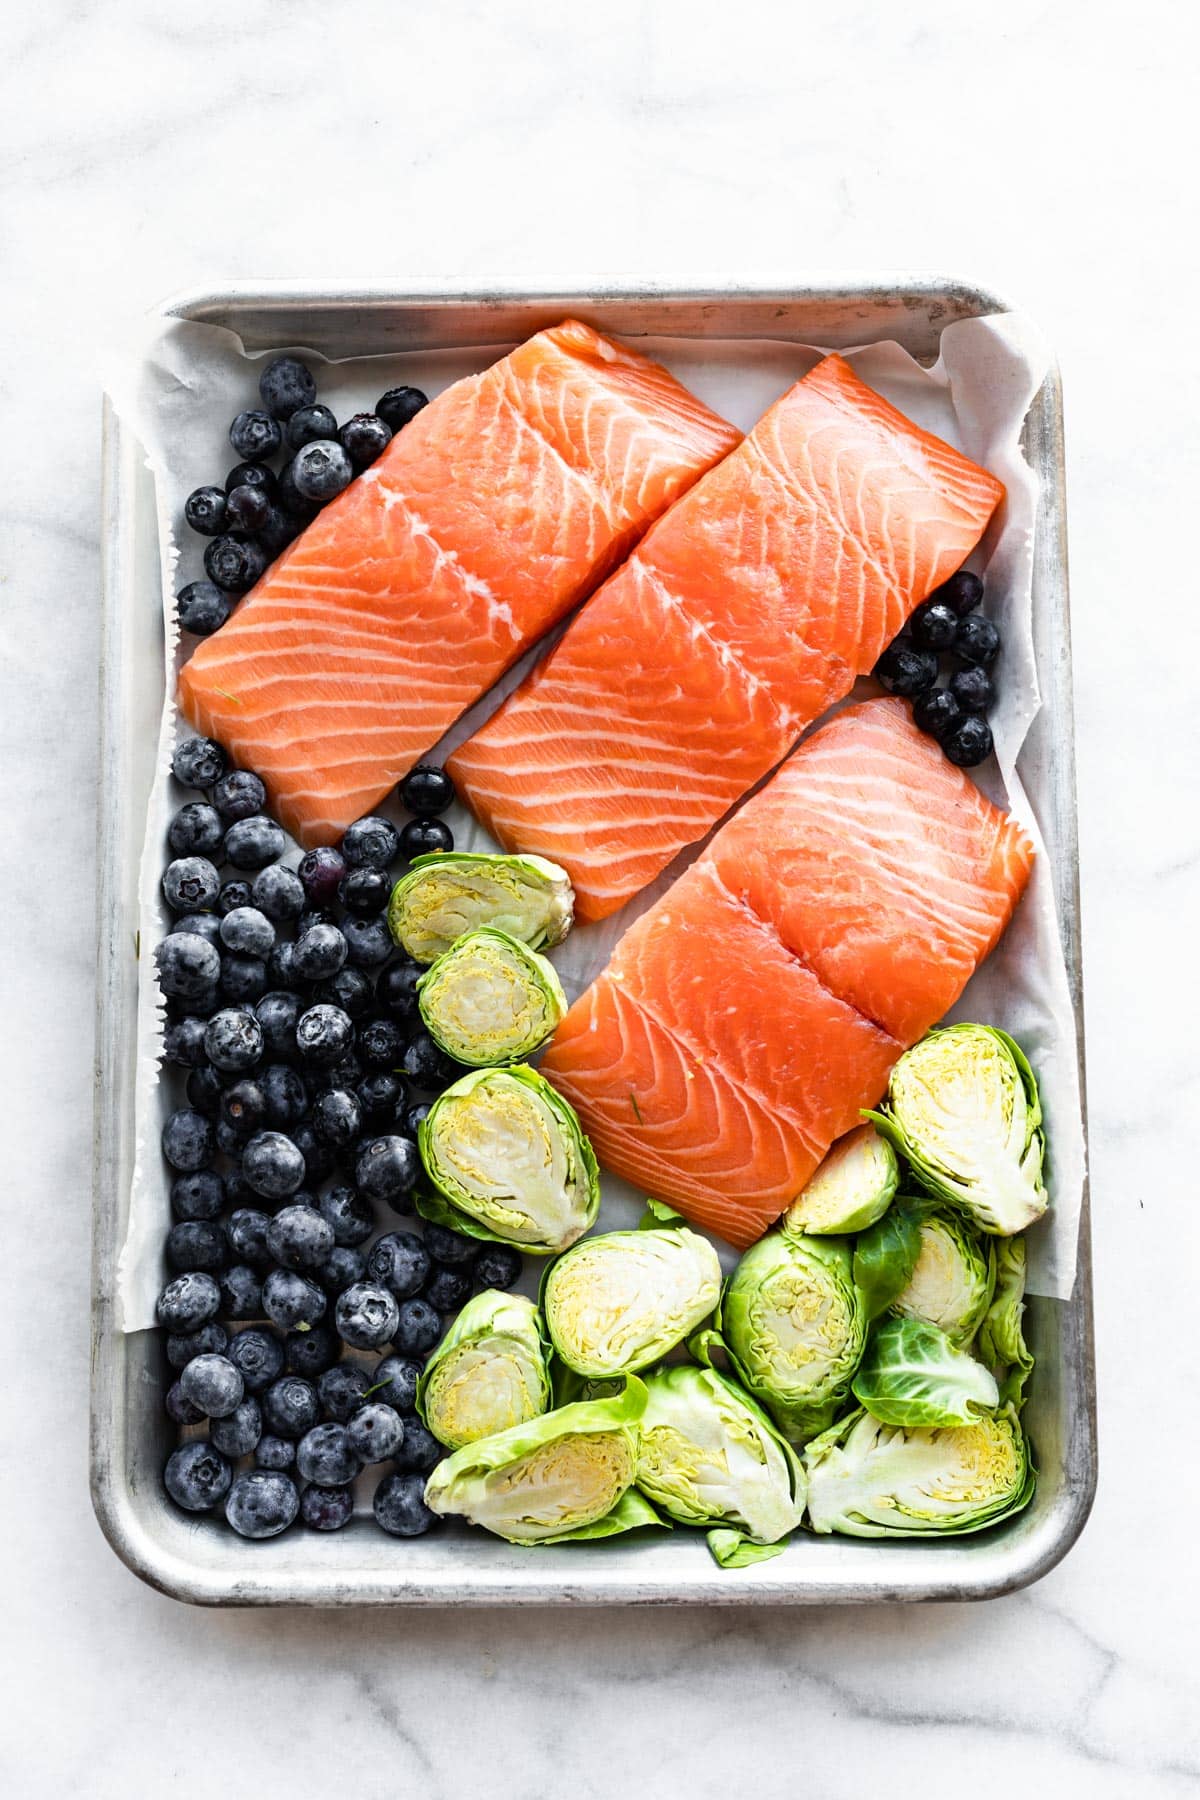 Overhead image of a sheet pan with three salmon filets, fresh blueberries, and Brussels sprouts.